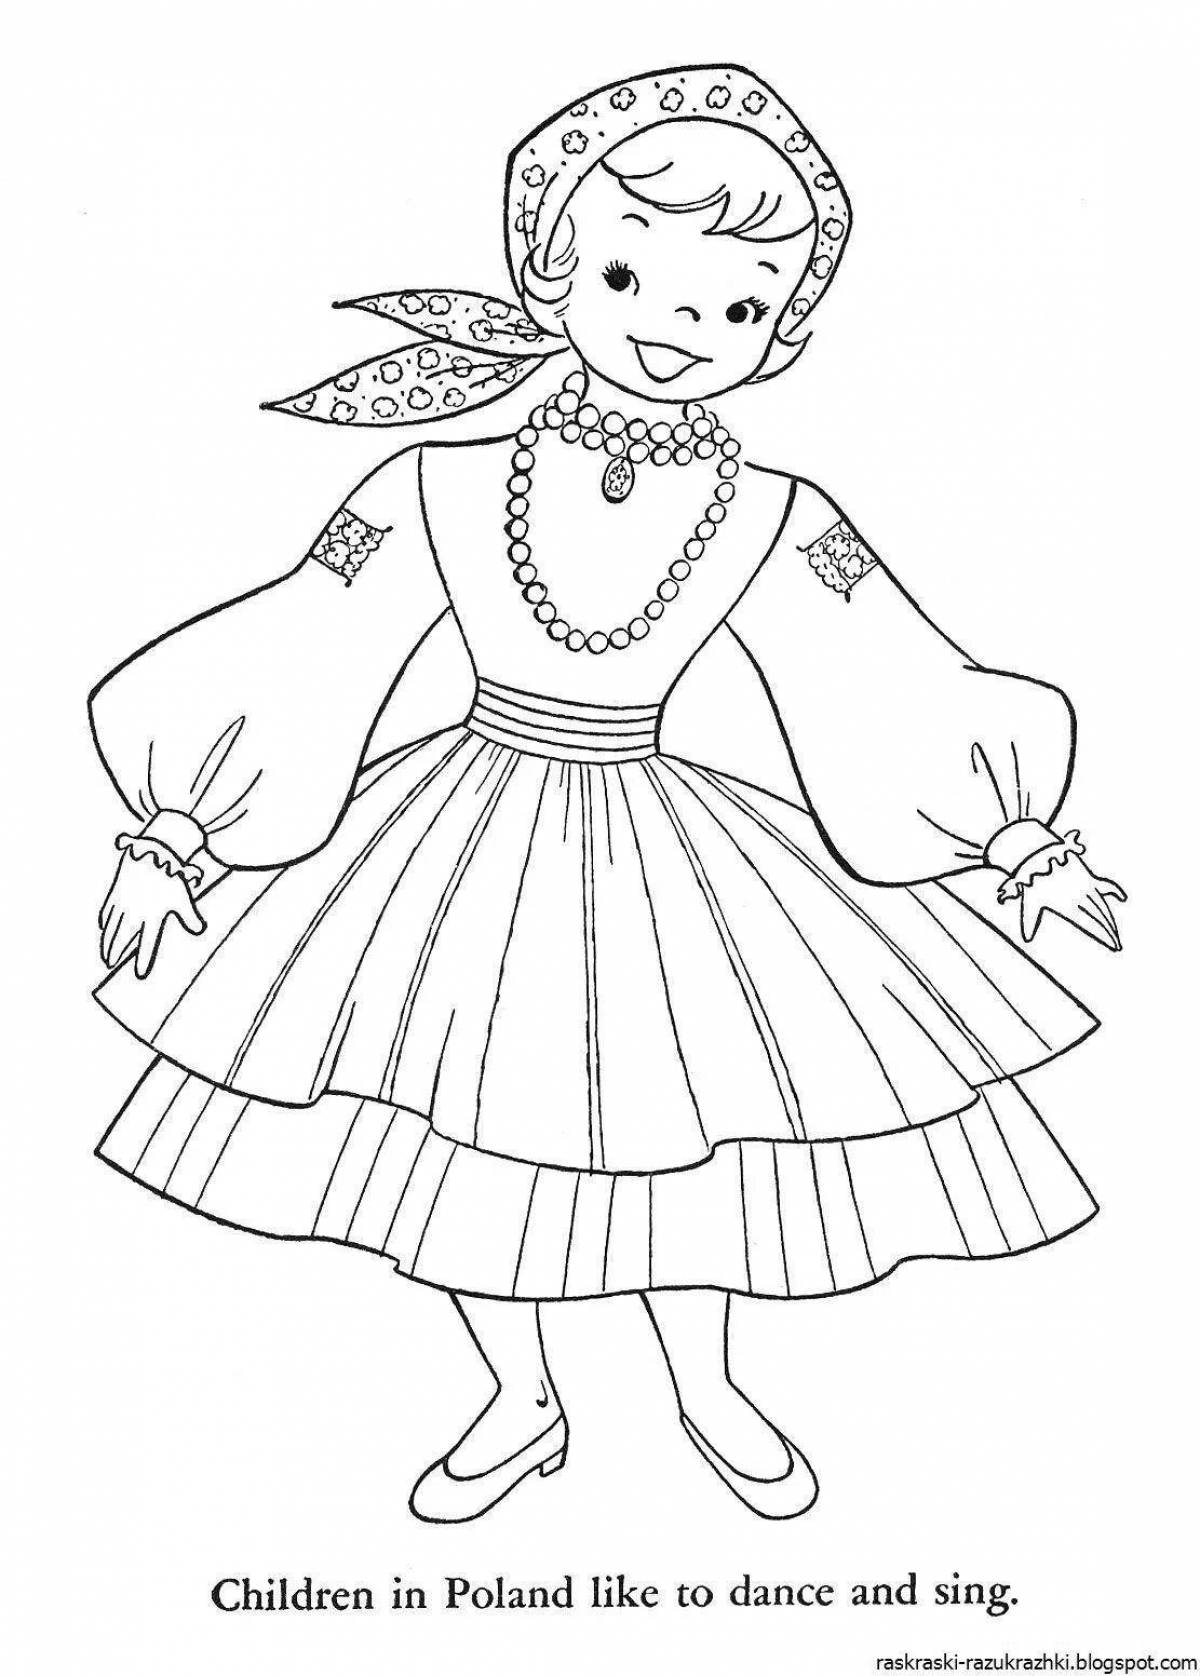 Exquisite belarusian clothes coloring pages for kids